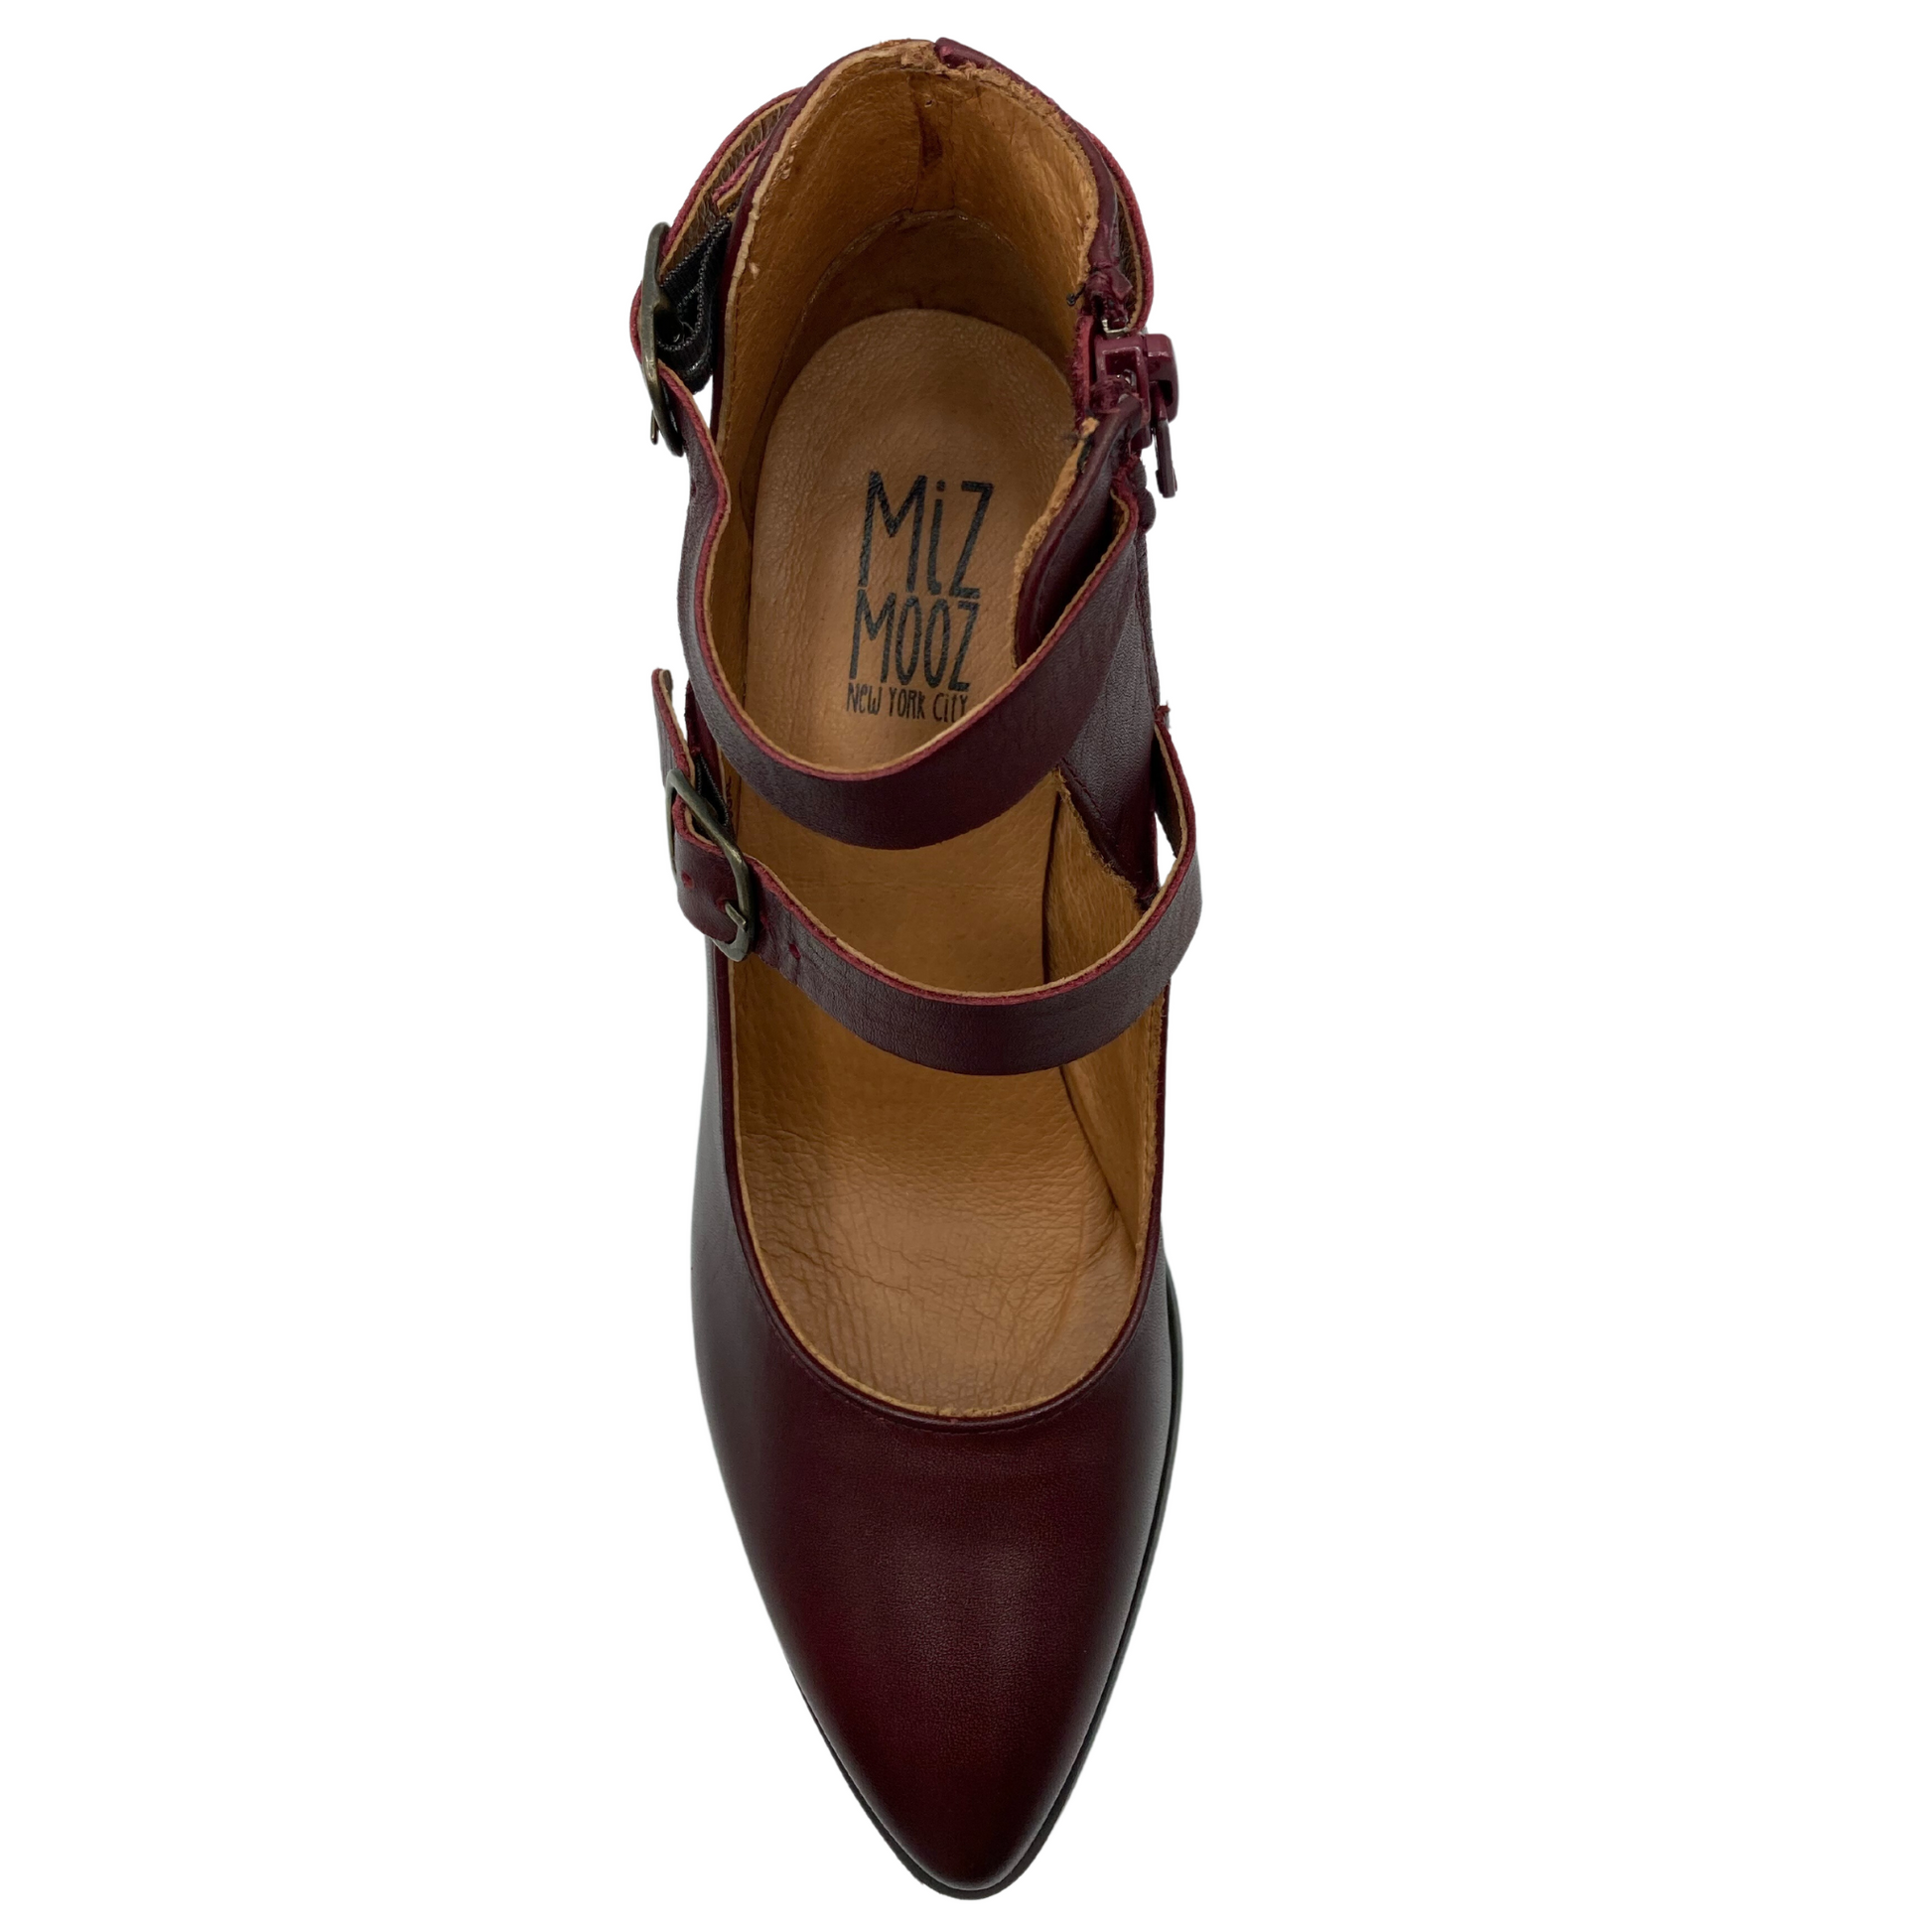 Top view of leather shoe with pointed toe and double strap on upper